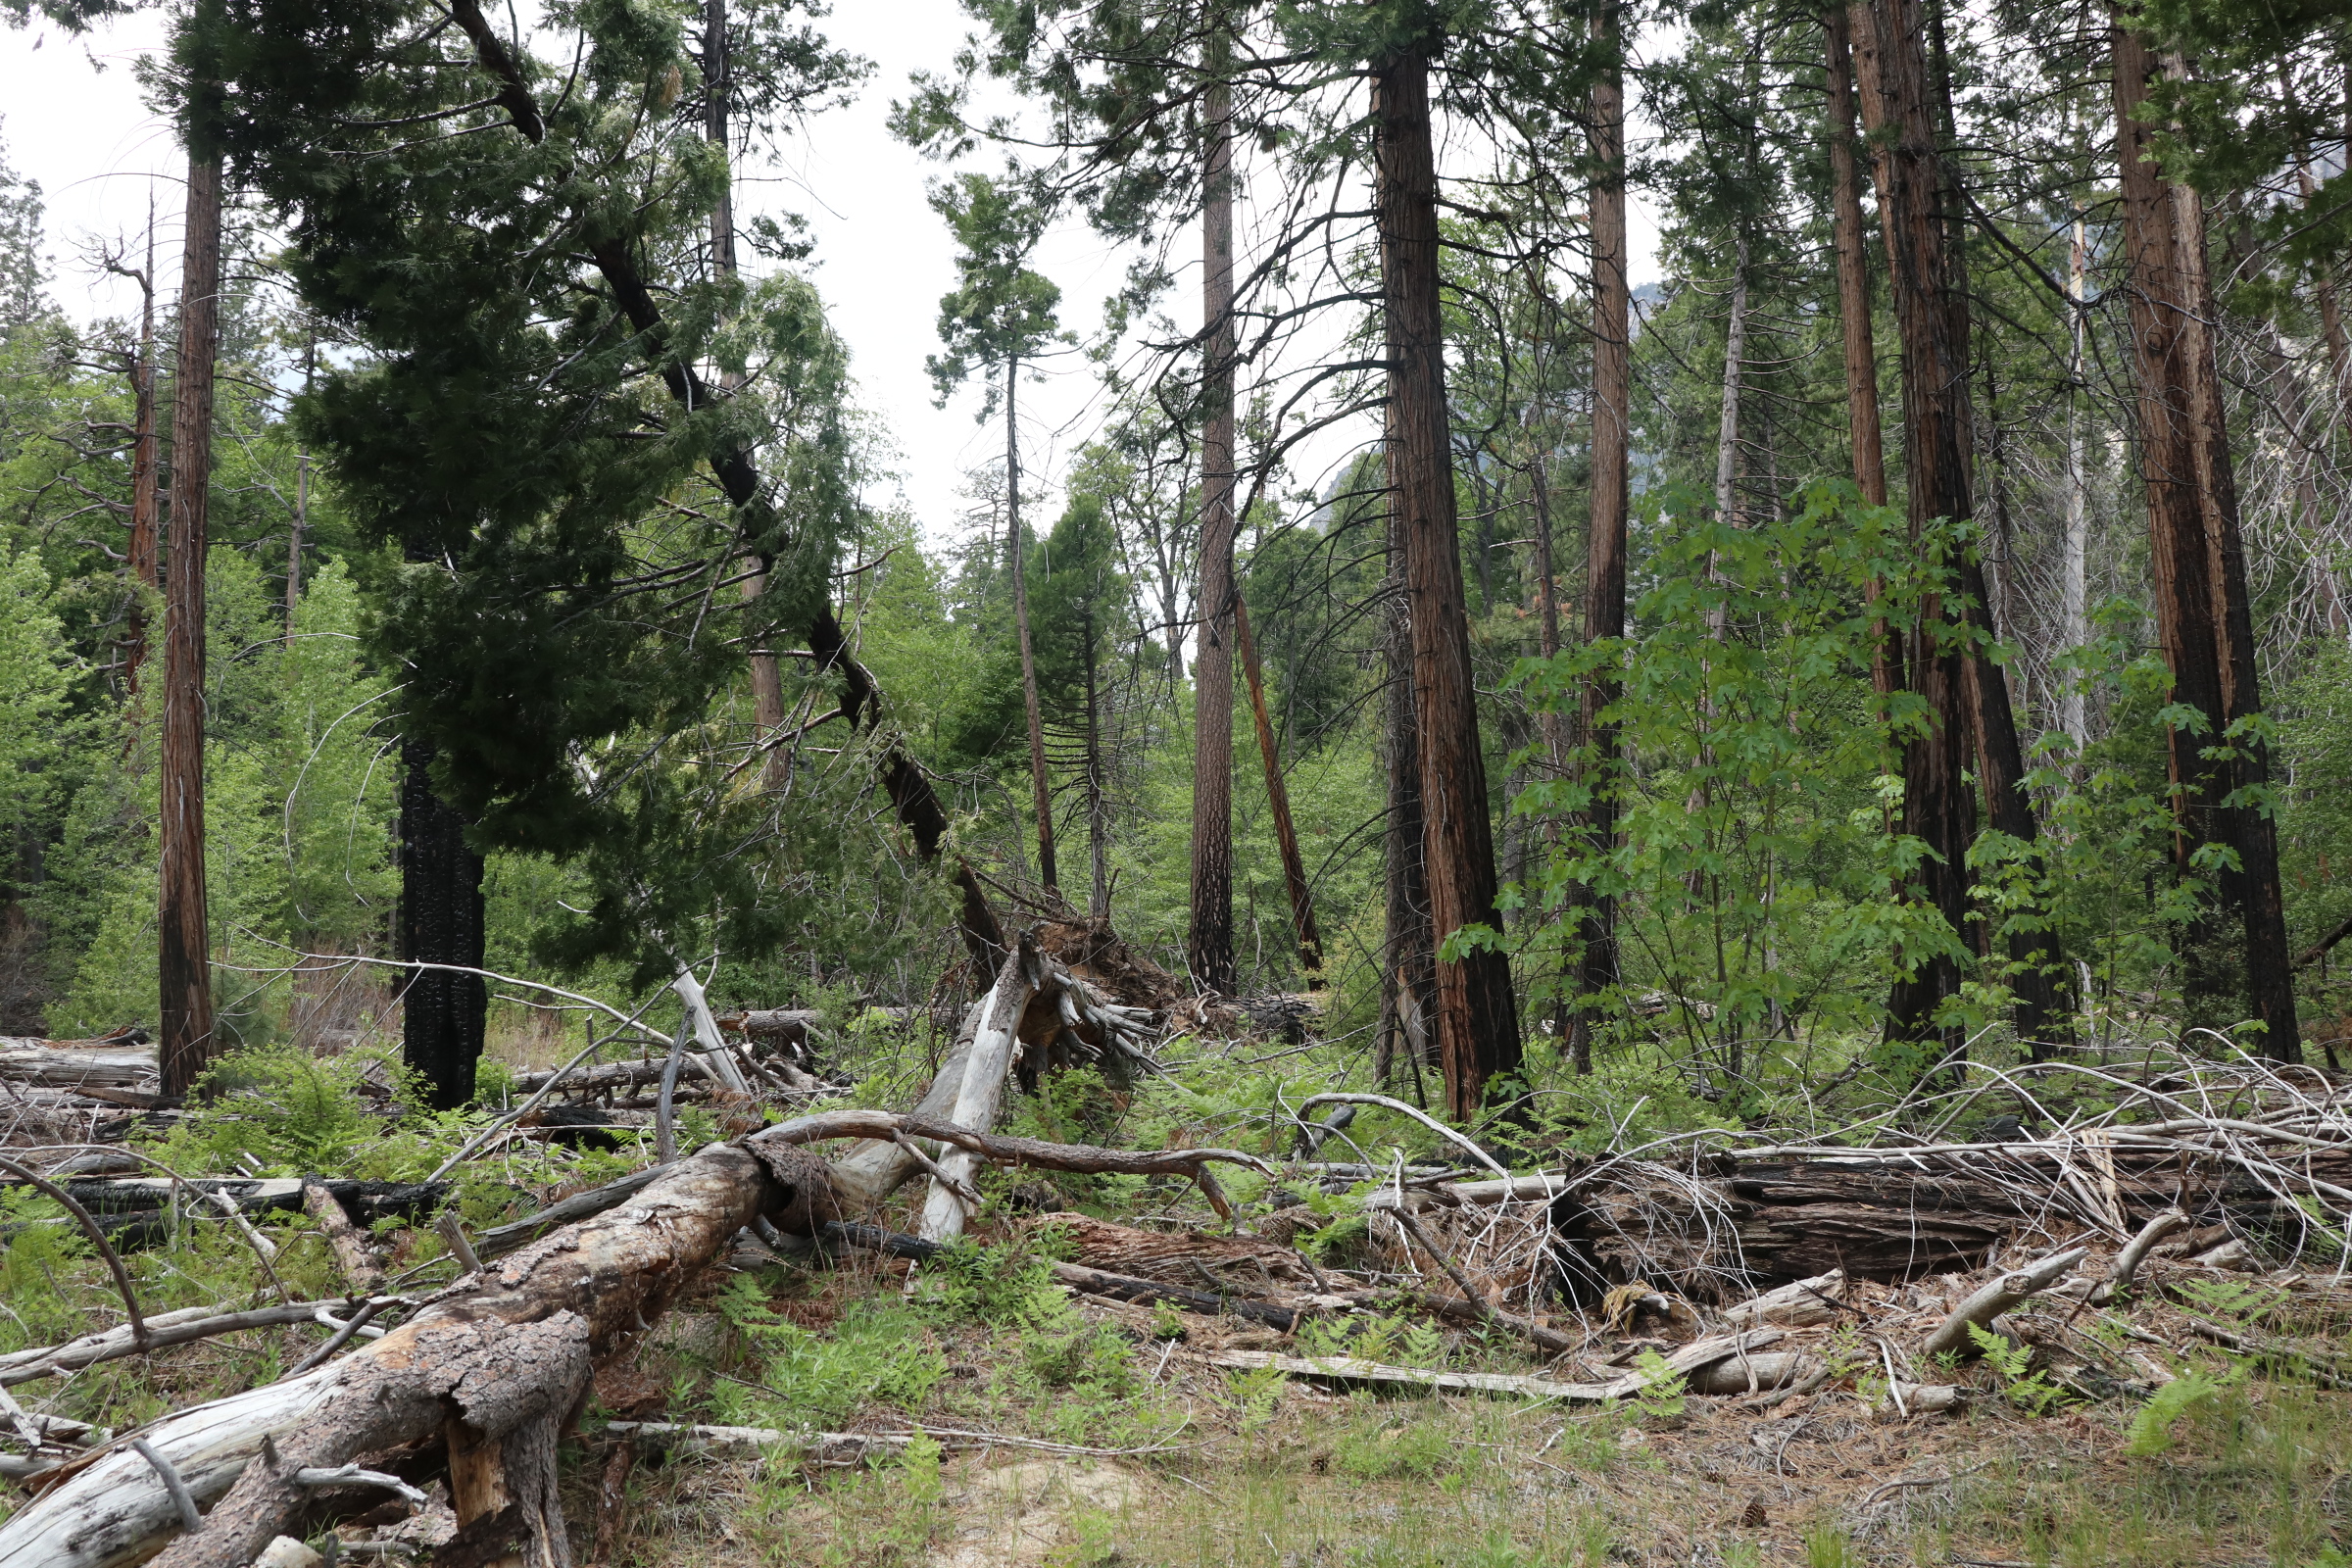 In nearly a decade, the amount of dead and down vegetation has accumulated so much in Central Cedar Grove, that walking through the forest would be difficult.